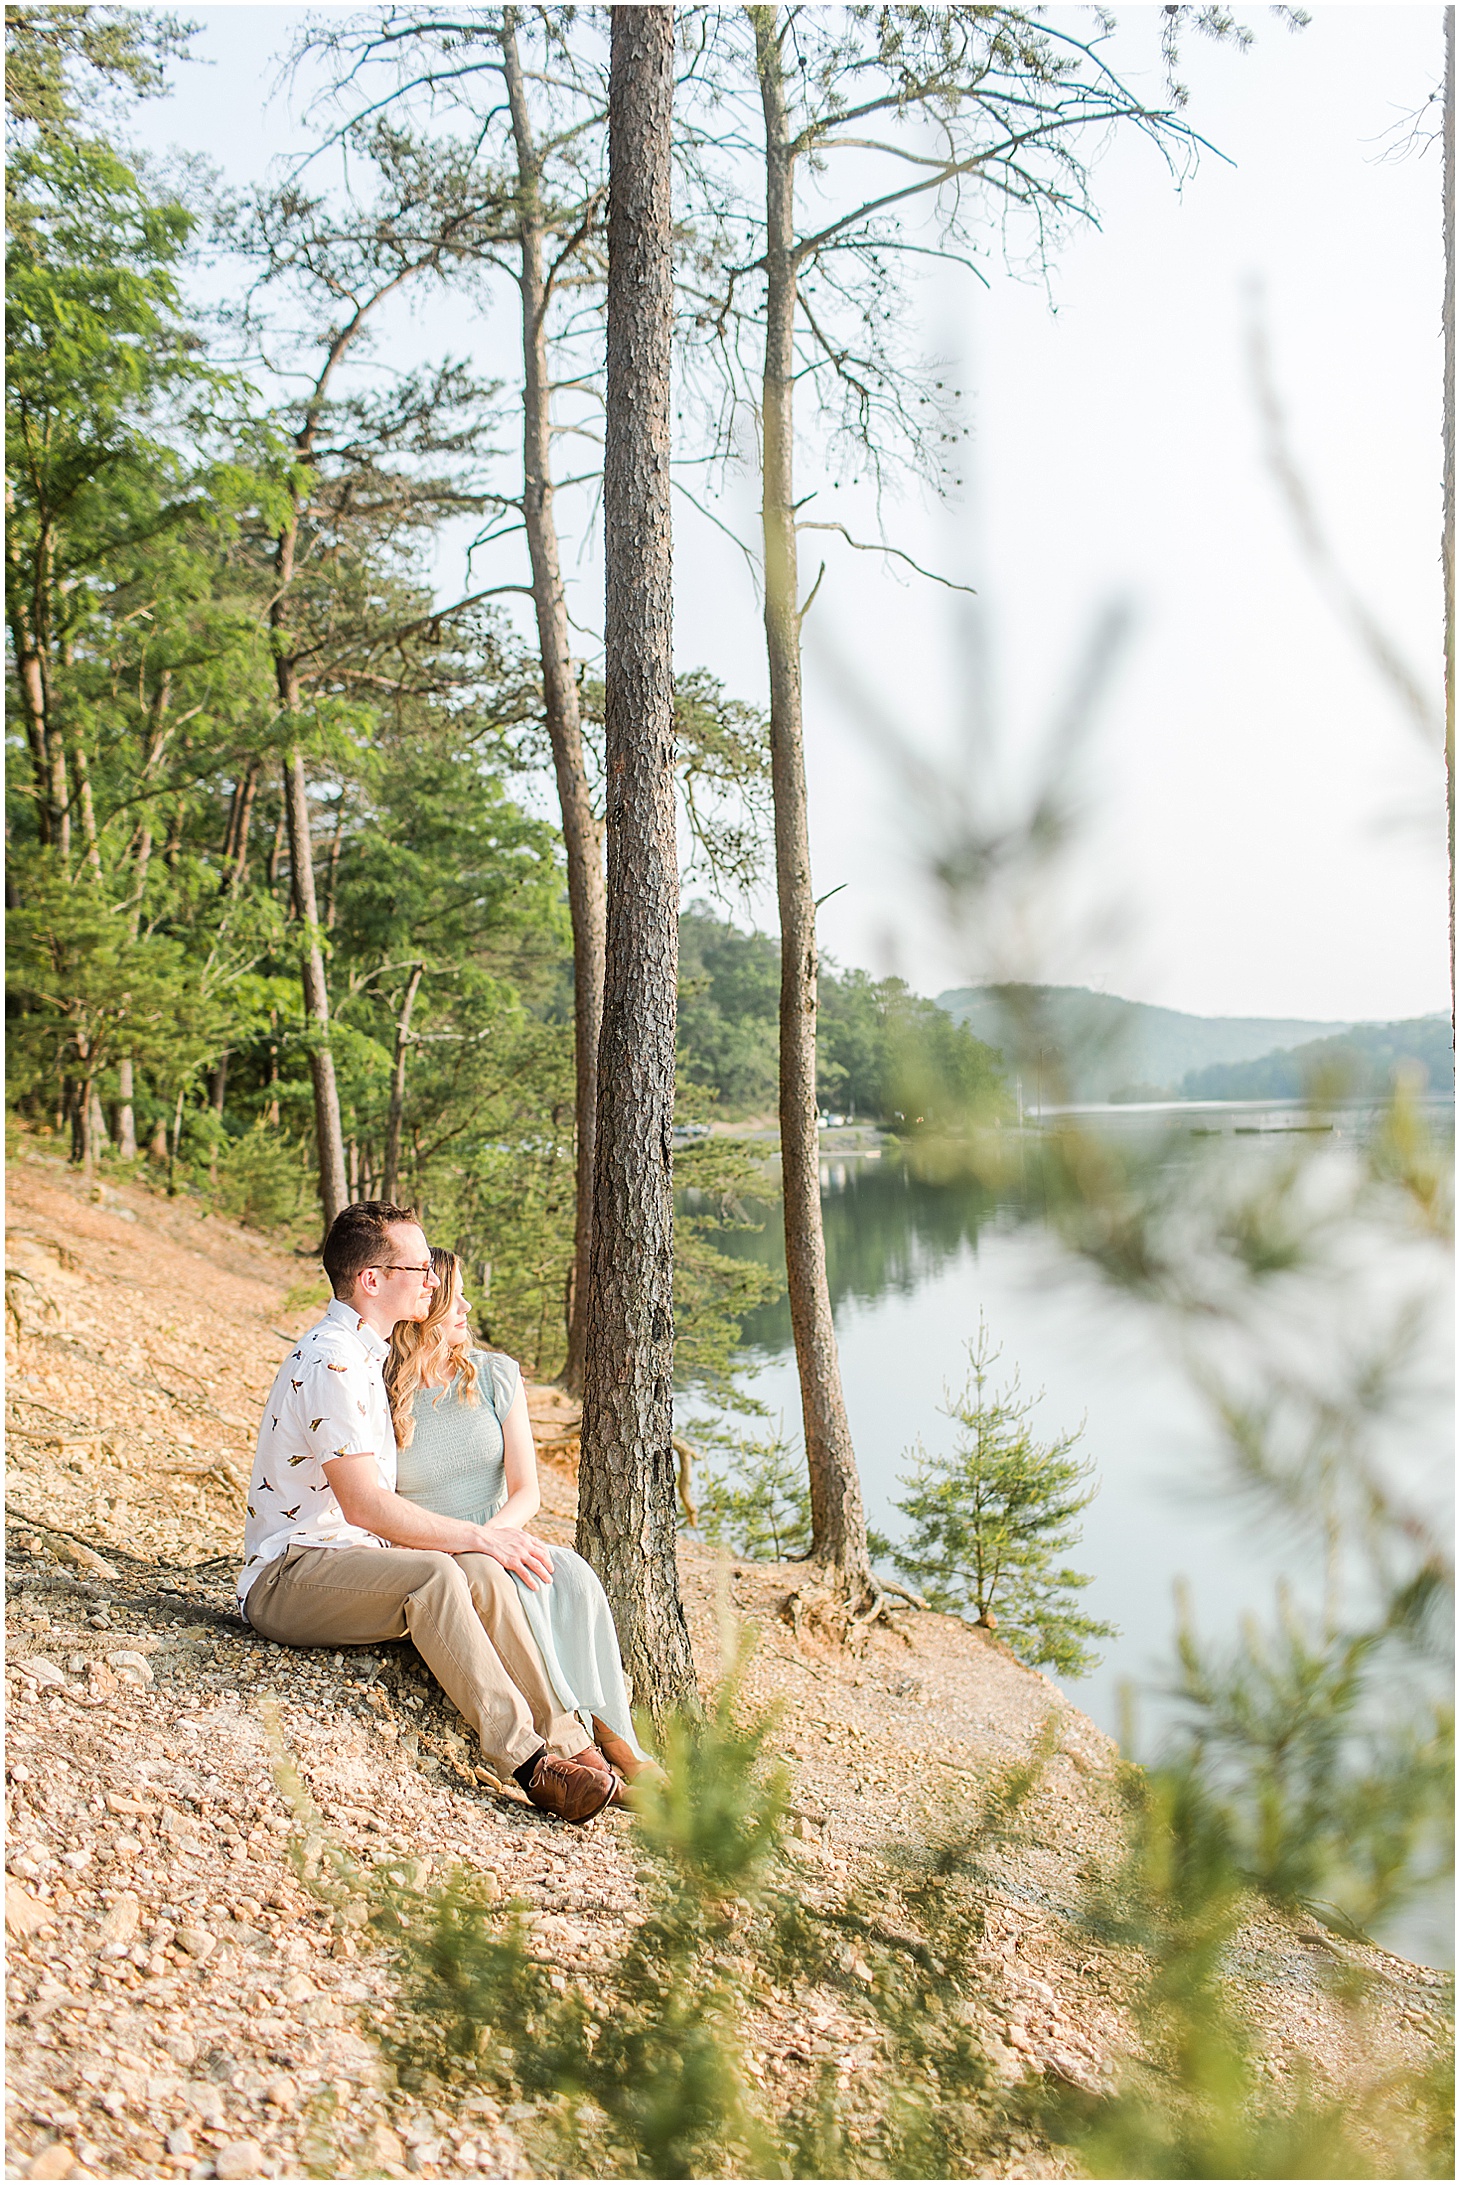 carvinscove_roanokeengagementsession_virginiaweddingphotographer_vaweddingphotographer_photo_0001.jpg